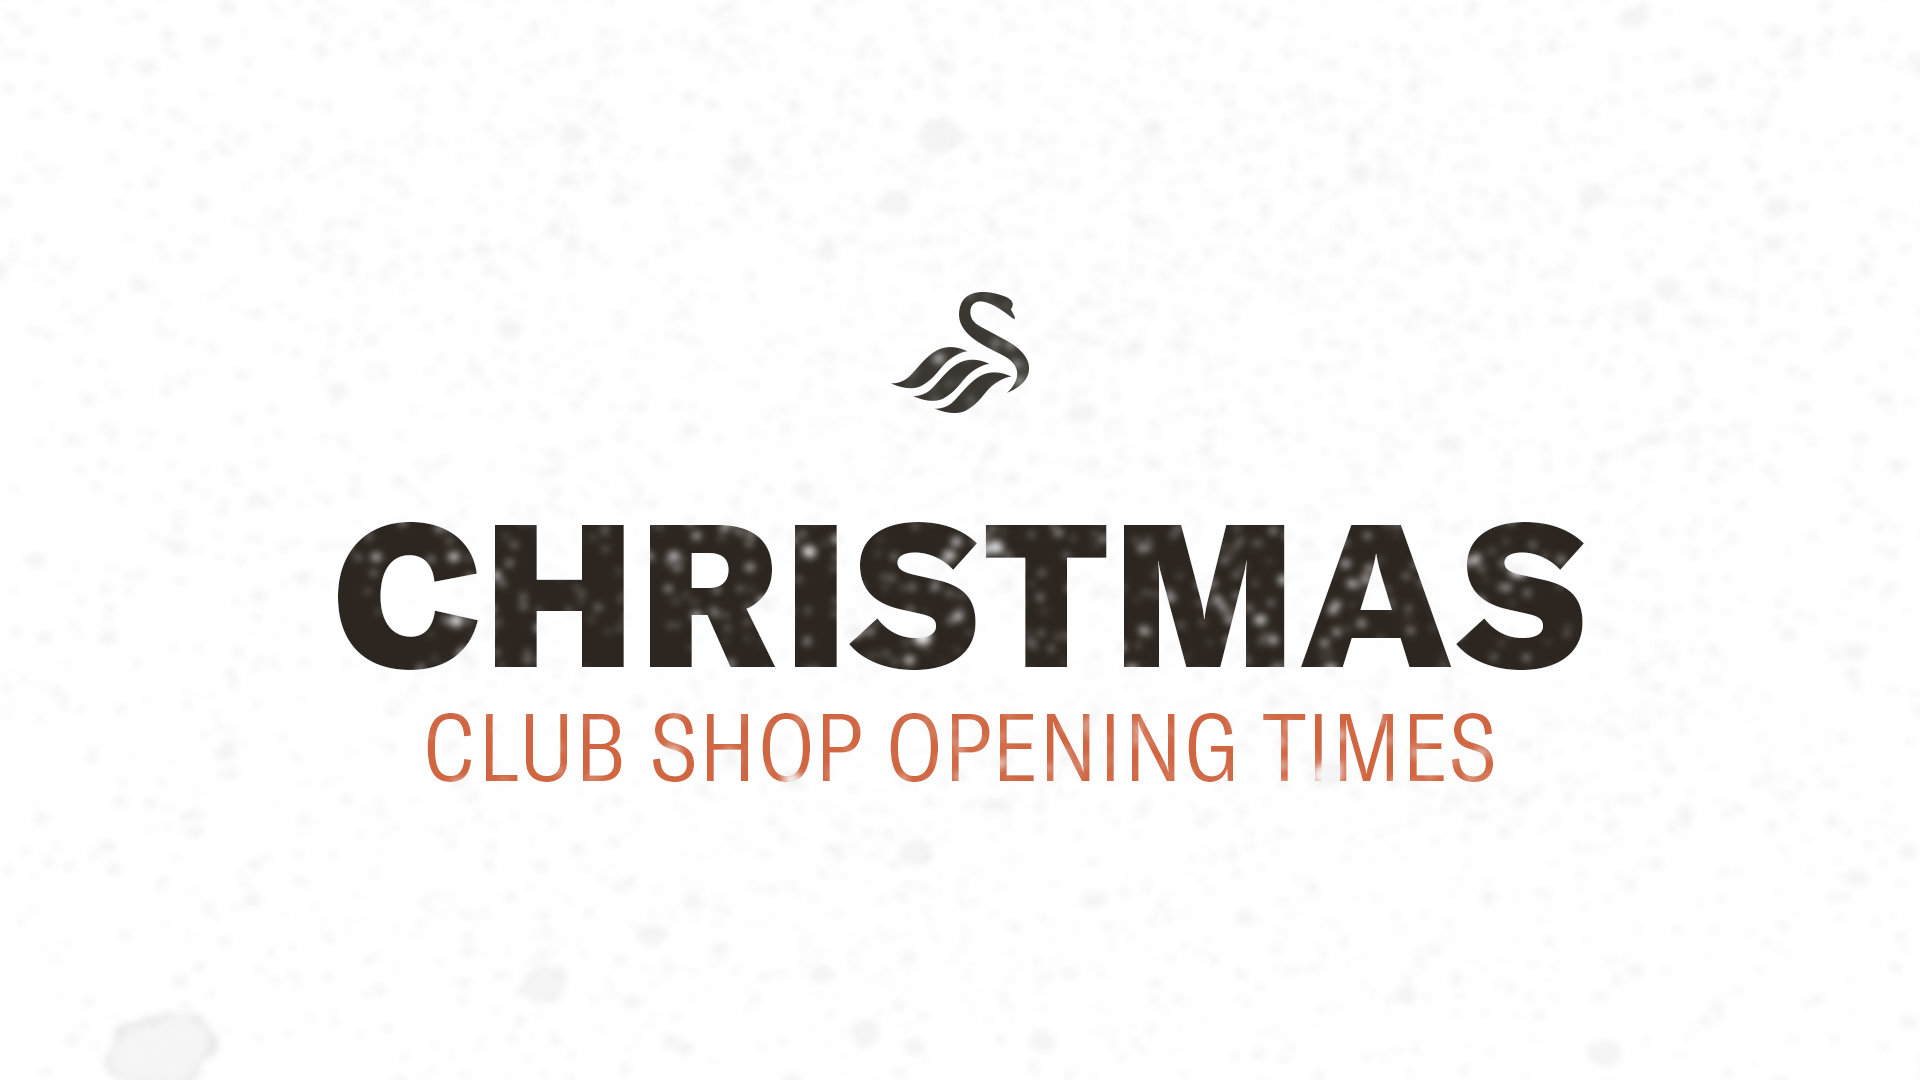 Club Shop Opening Times